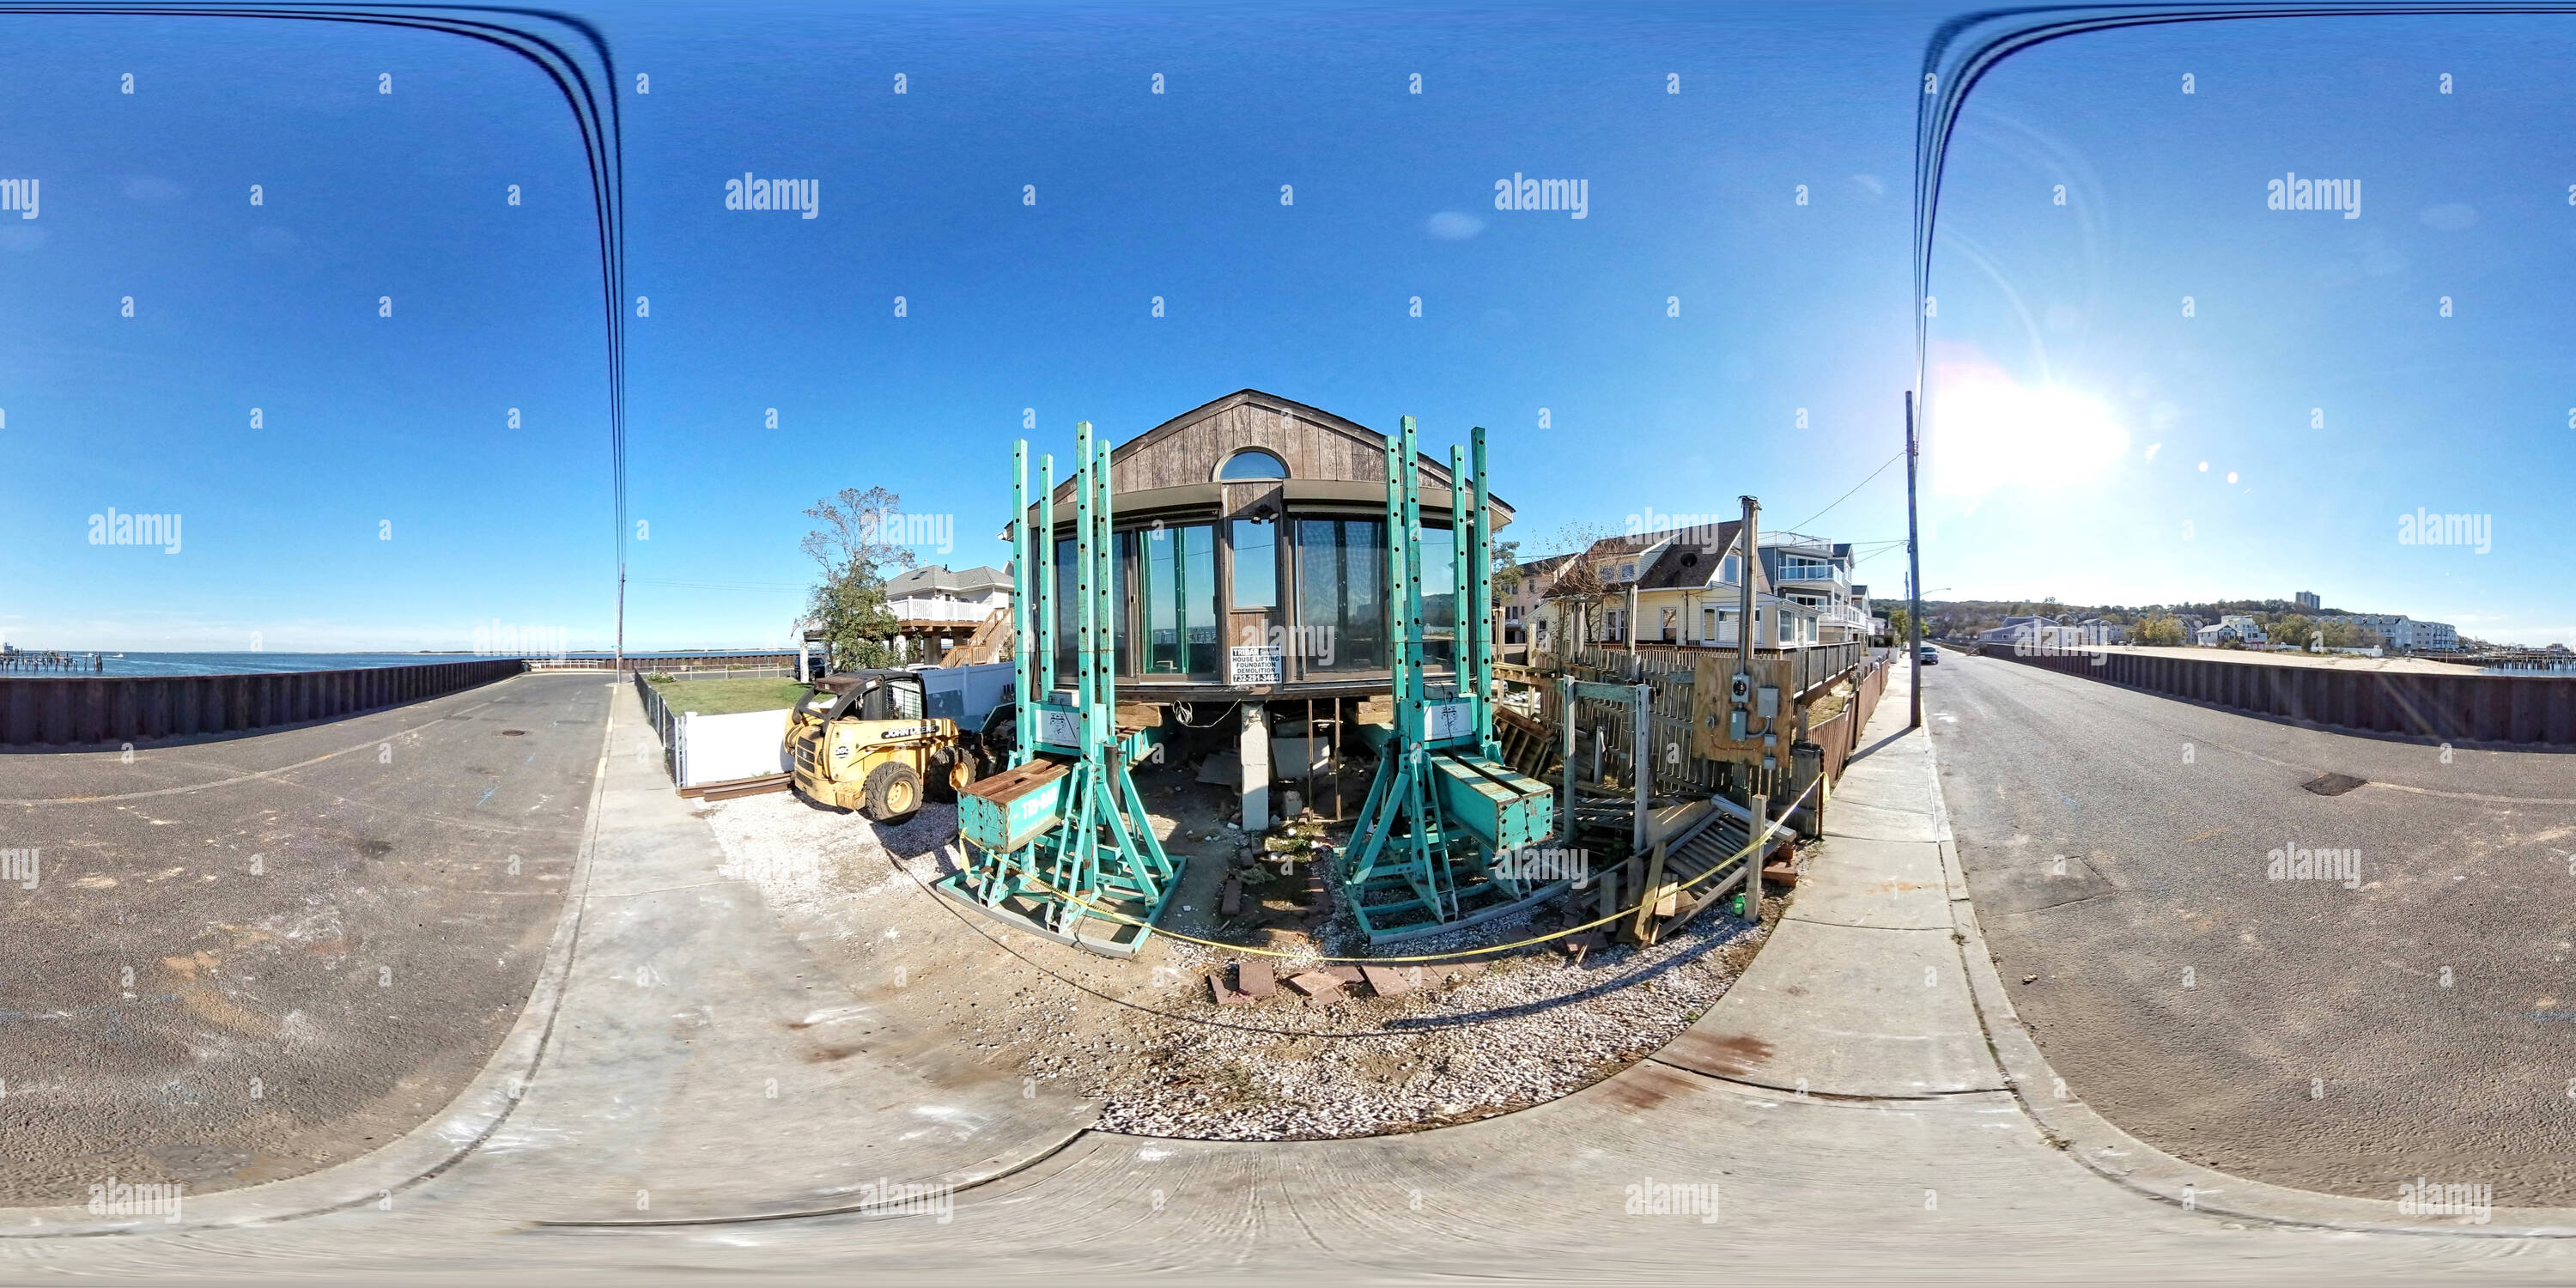 360 degree panoramic view of House Lifting in Highlands, NJ - After Super Storm Sandy